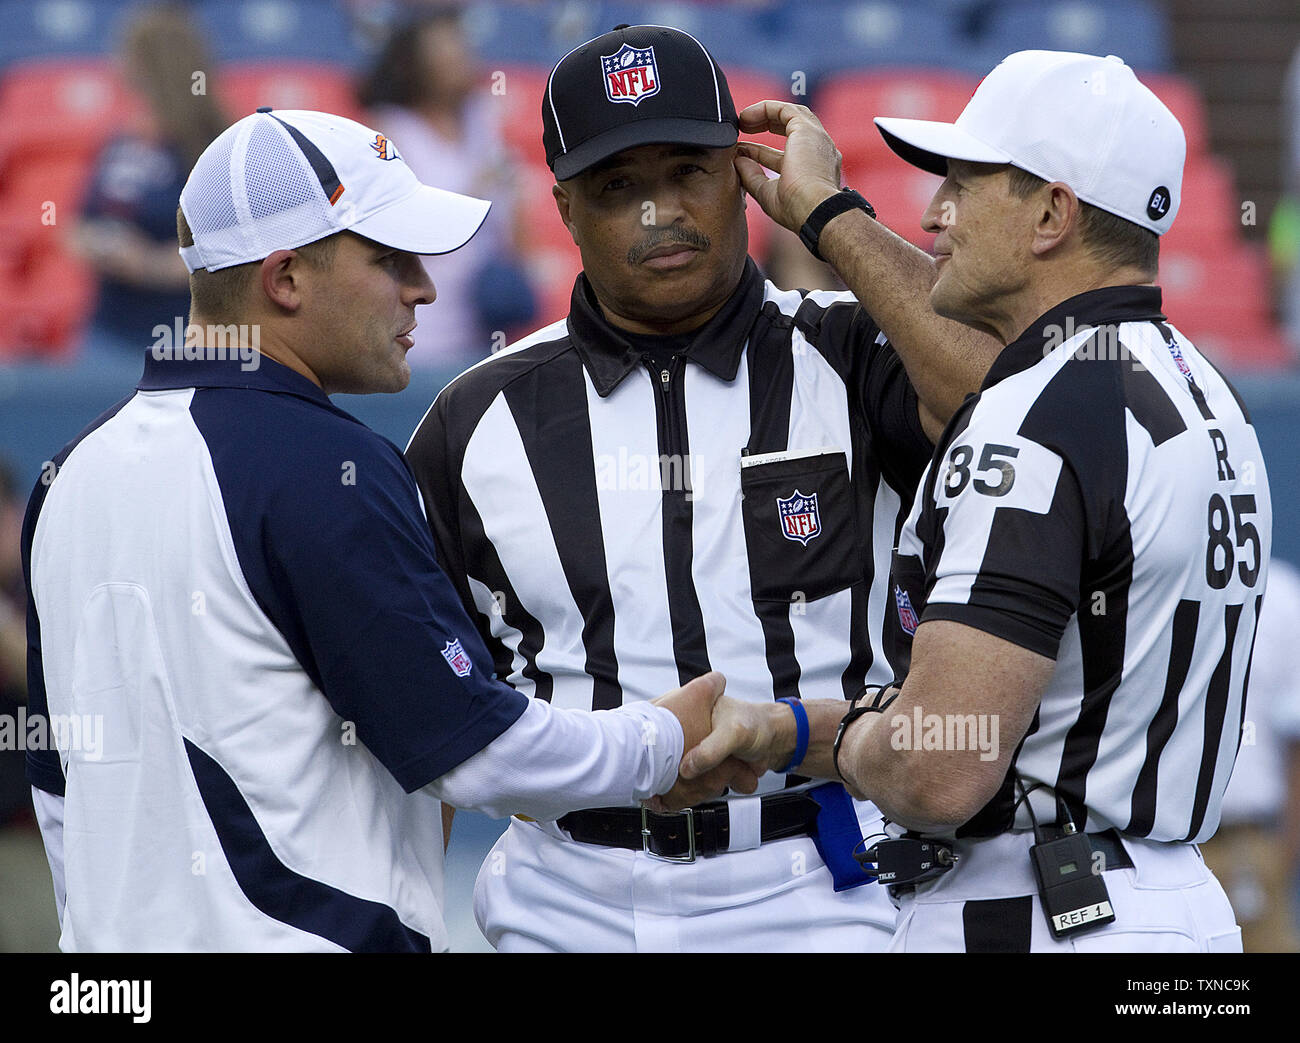 Denver Broncos head coach Josh McDaniels (L) greets referee Ed Hochuli, and back judge Don Carey (C) at Invesco Field at Mile High on August 21, 2010 in Denver.      UPI/Gary C. Caskey Stock Photo